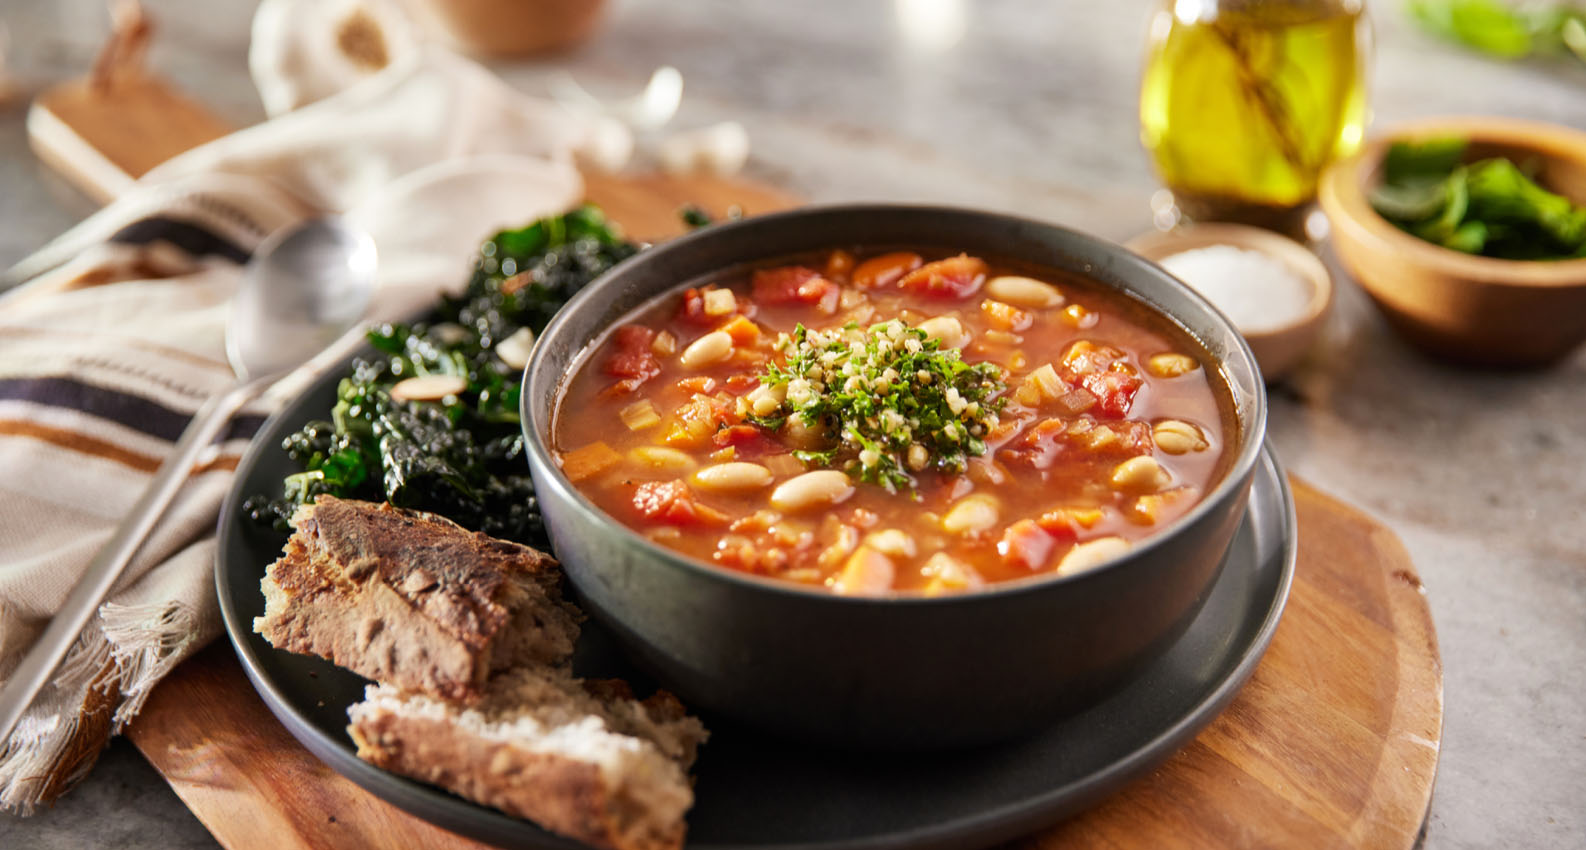 A bowl of minestrone soup with bread and a salad